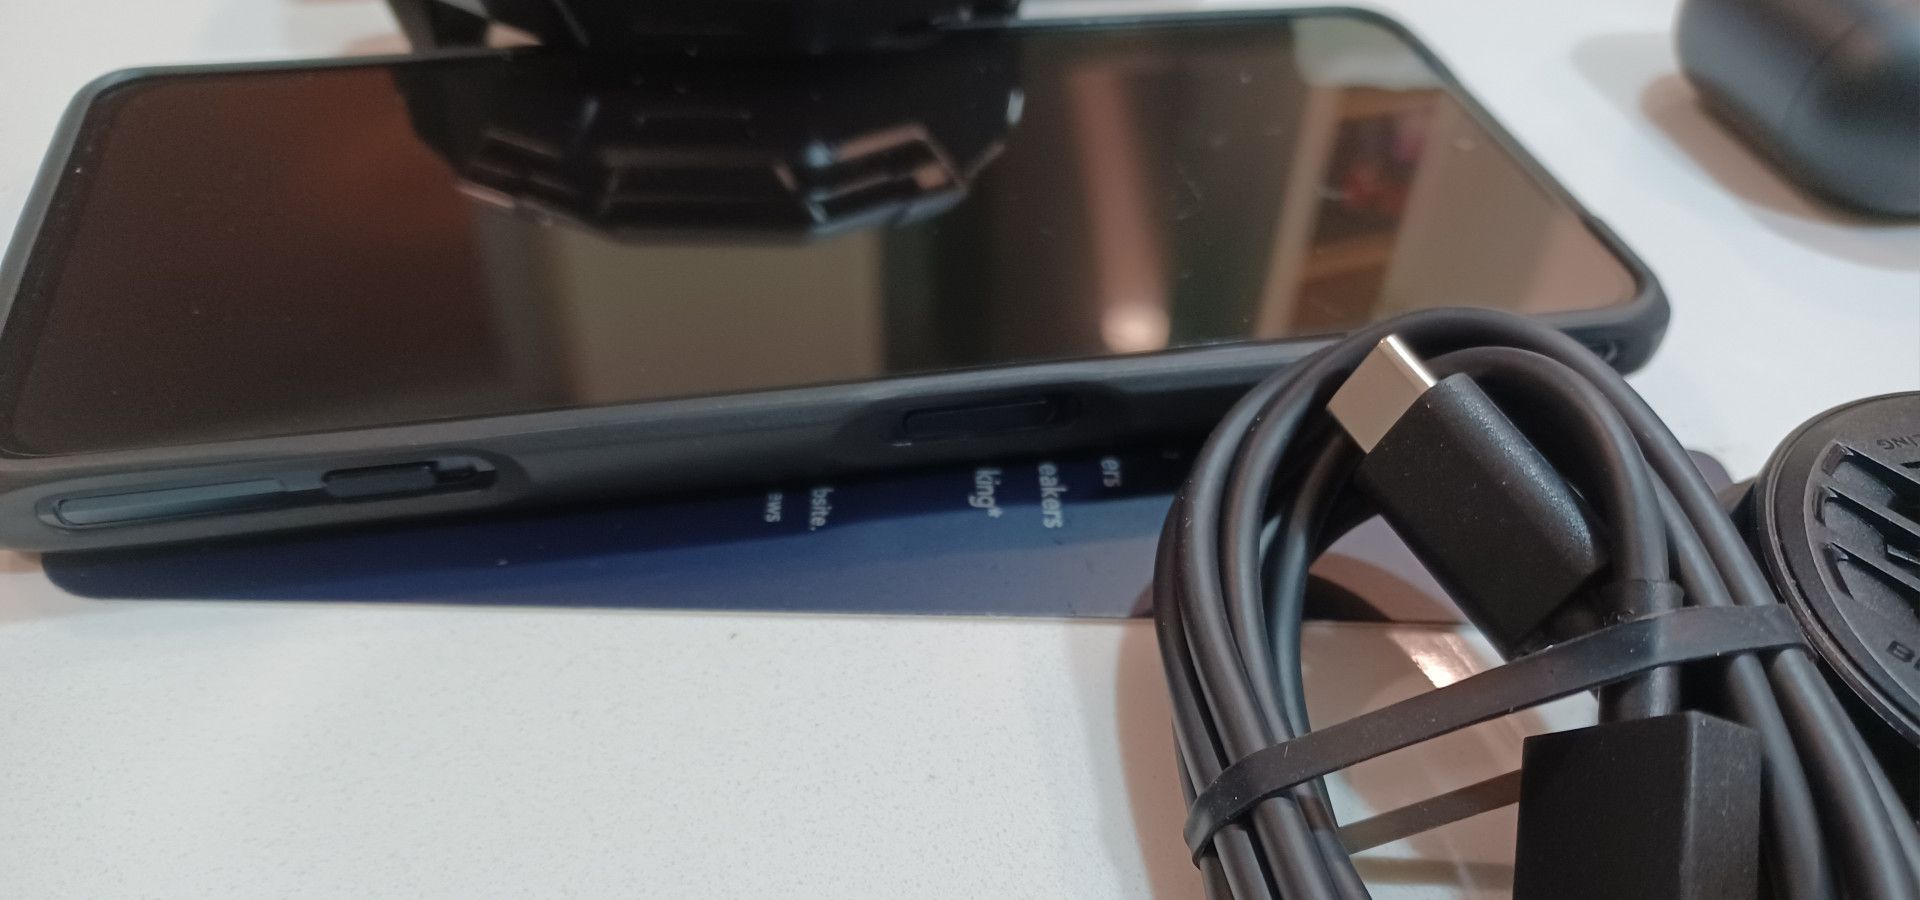 Black Shark 4 Pro with USB C cable